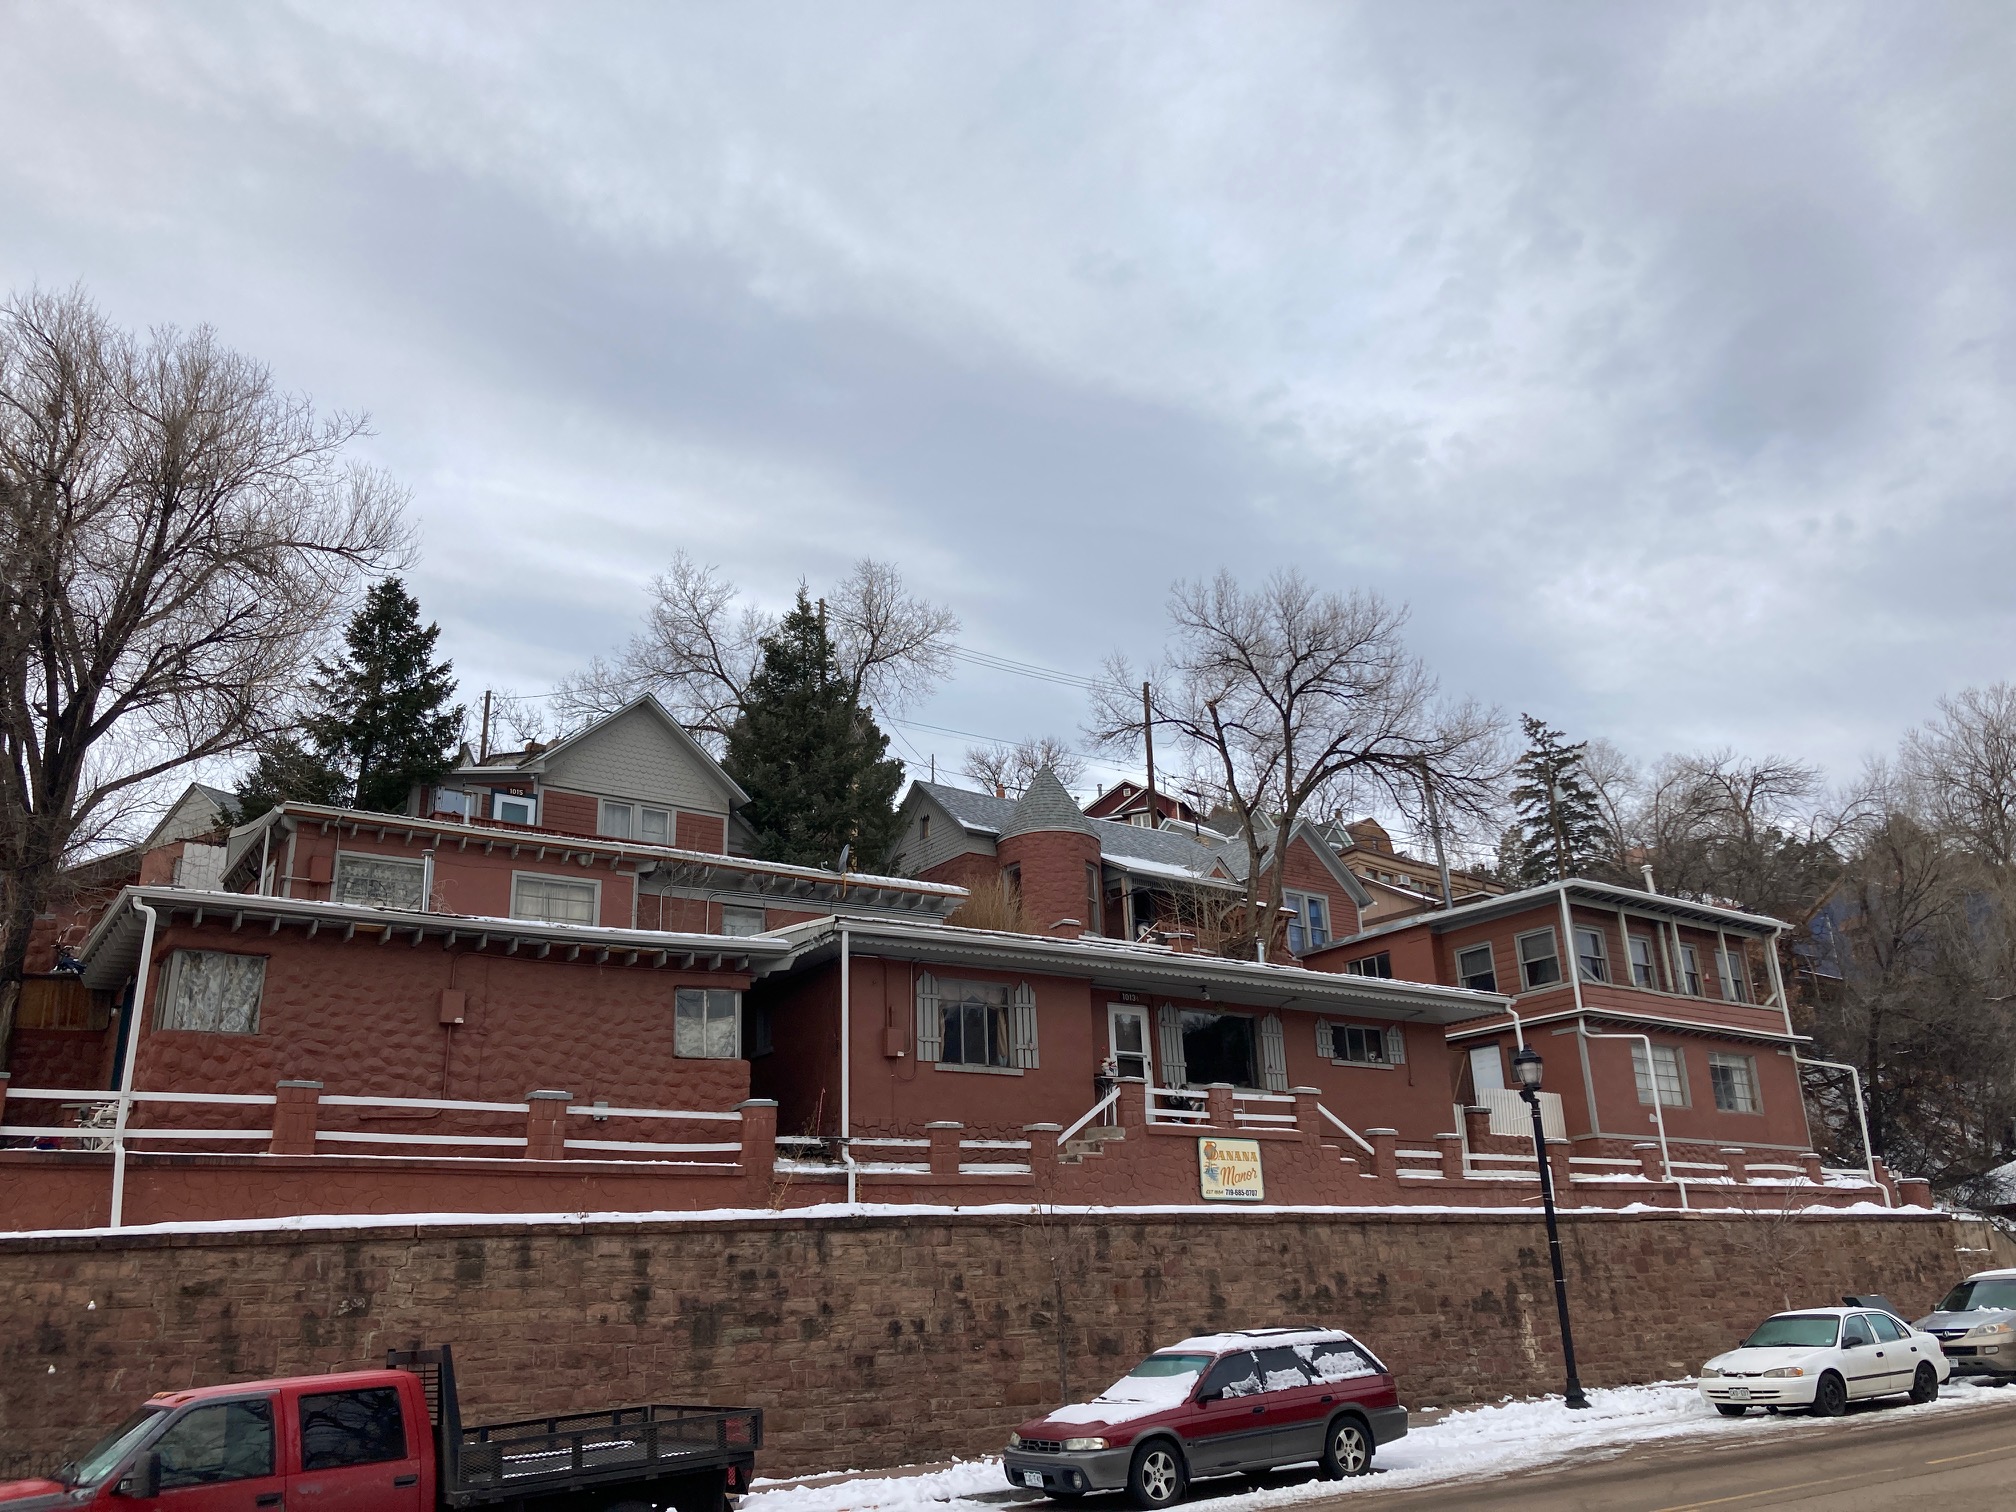 DISCOUNT SALE/LEASEBACK/BUYBACK ON 7 UNITS IN MANITOU SPRINGS